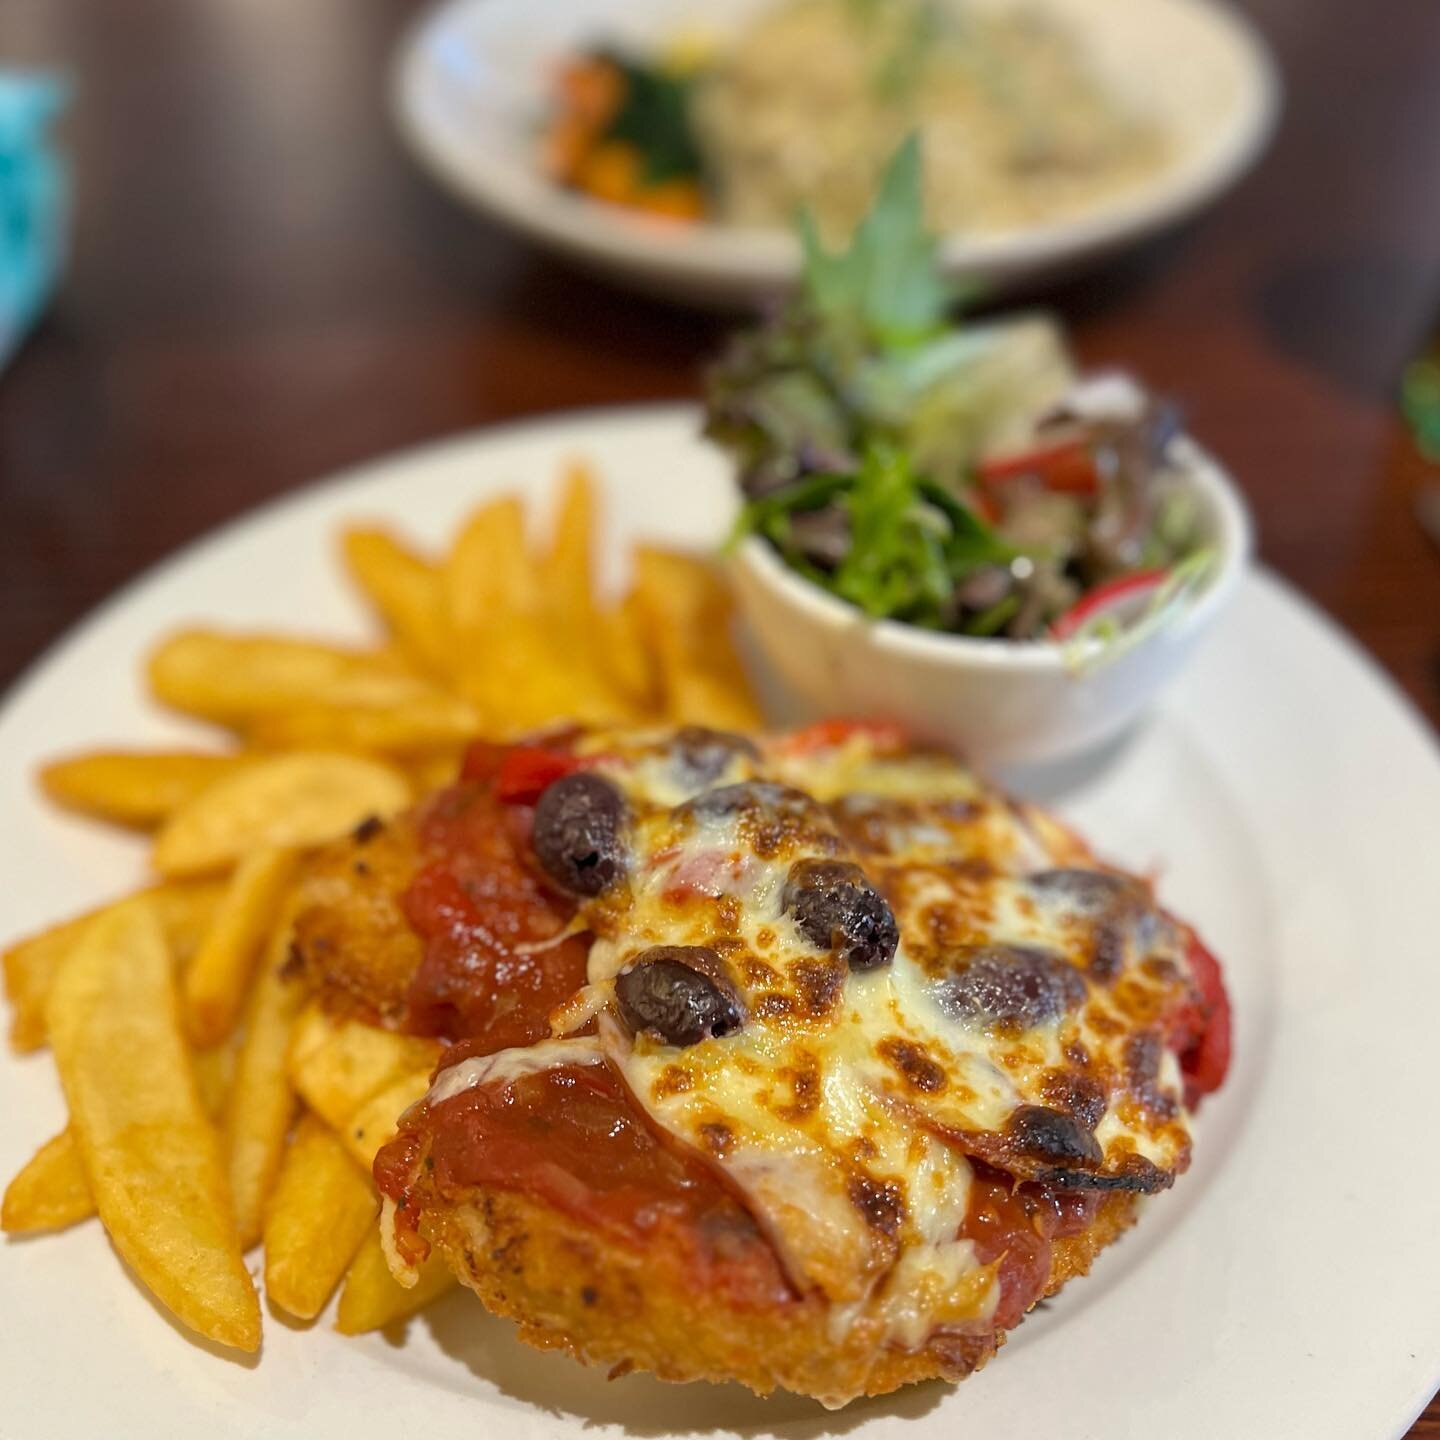 I wrote a long post about my trip to the @gladstoneparkhotel and this Spanish parma with salami, olives and salsa, but Instagram glitched and deleted it, now I&rsquo;m too heartbroken to write it all out again 😅 

Good for a novelty parma, salami AN